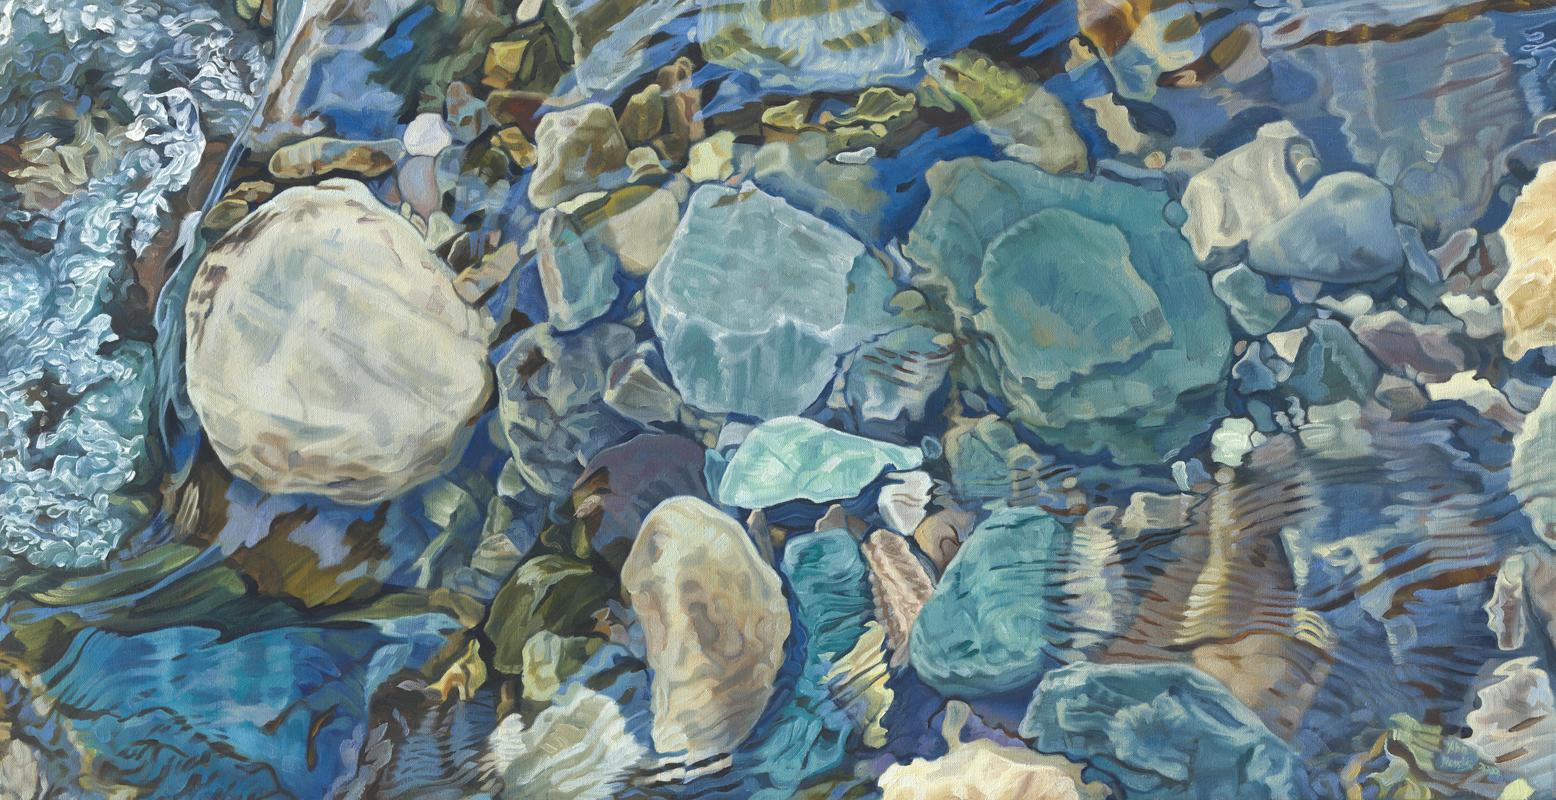 This limited edition print by John Harris captures a close up view of river rocks beneath lightly-rippling water in a horizontal format. It features a cool blue and earth-toned palette, with natural light reflecting lightly off the moving water.